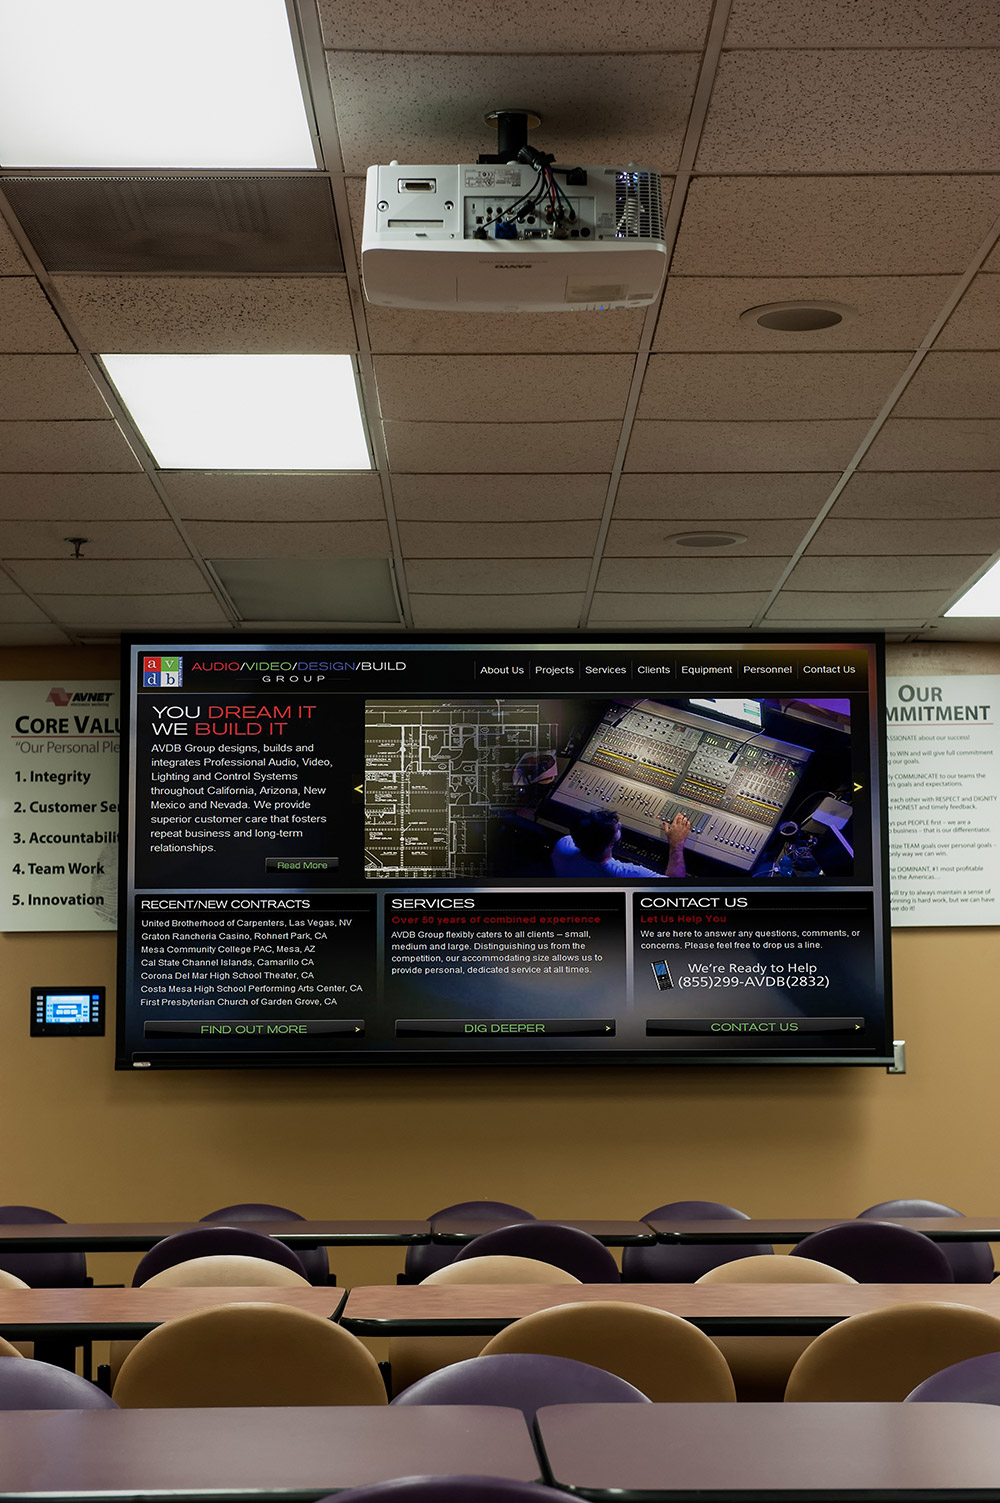 A TouchLink touchpanel is used to select inputs for presentations during company events and <nobr>all-hands</nobr> meetings in the café.